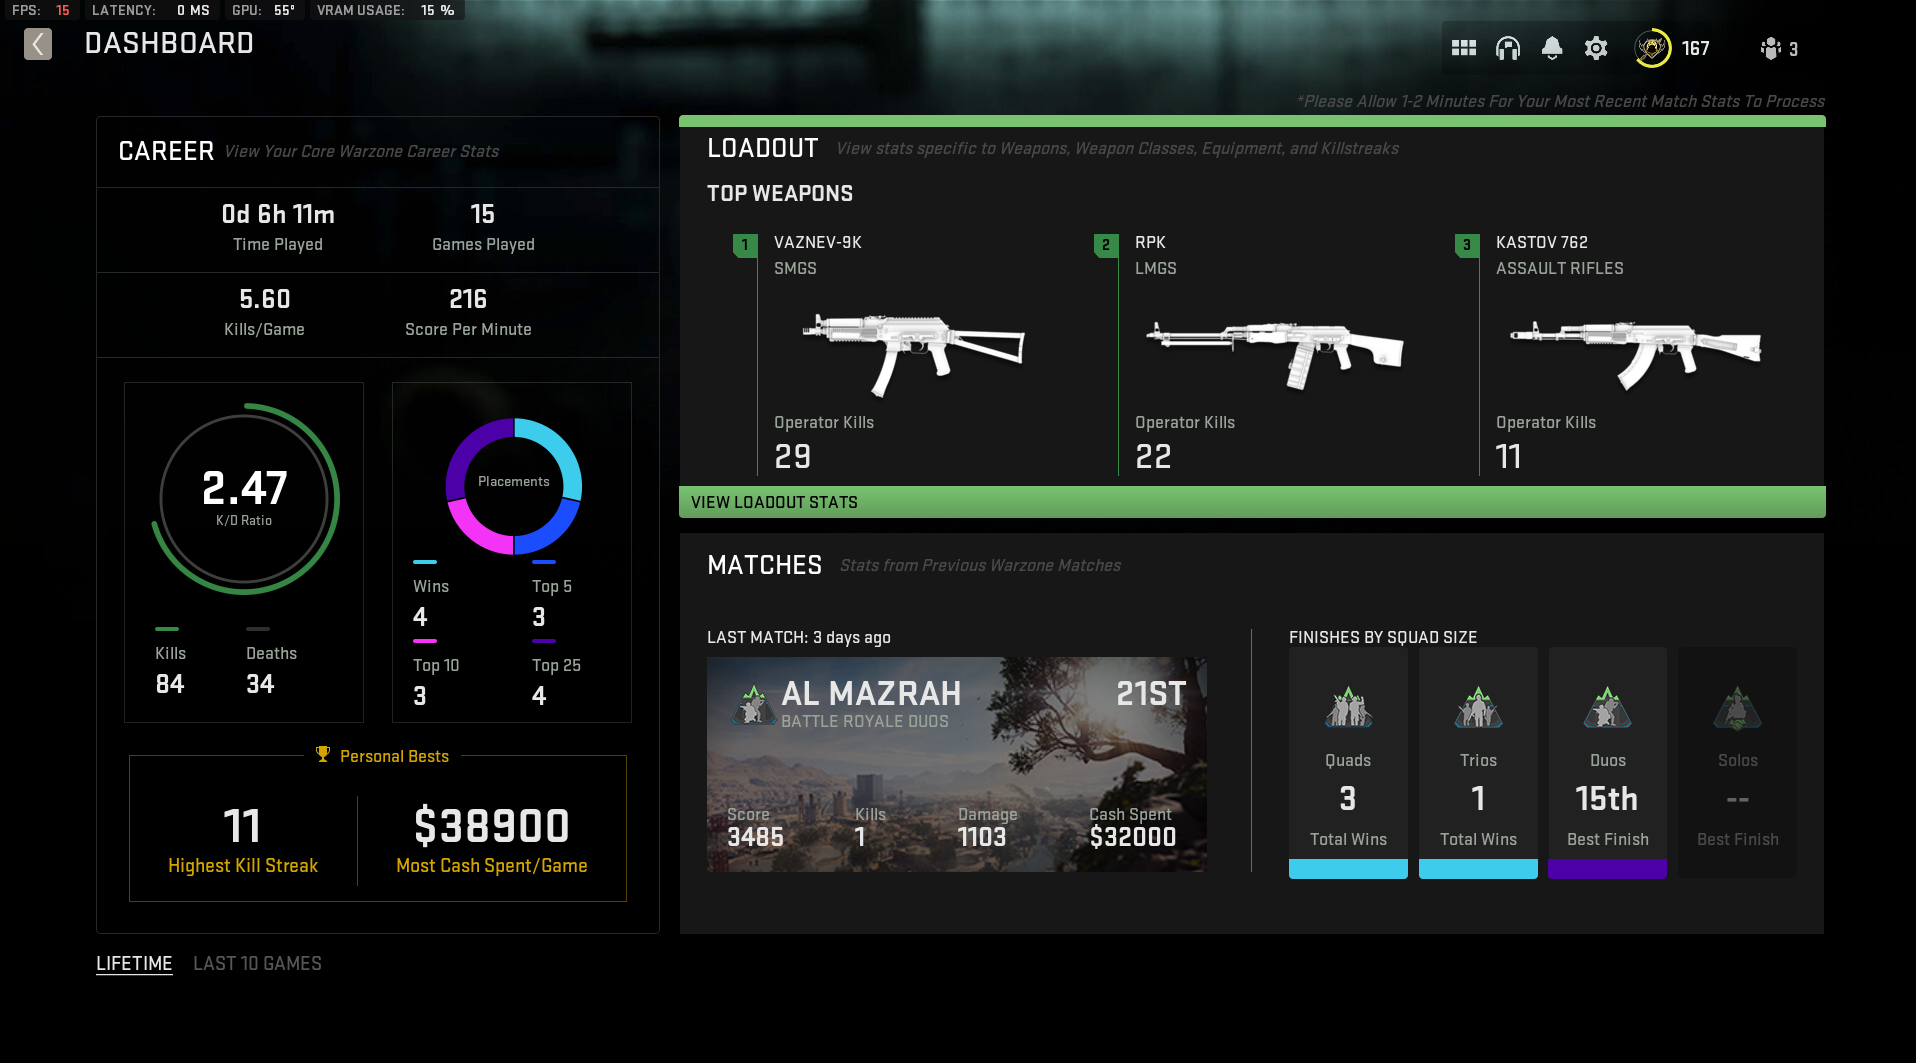 Screenshot of Stats Page in Warzone 2